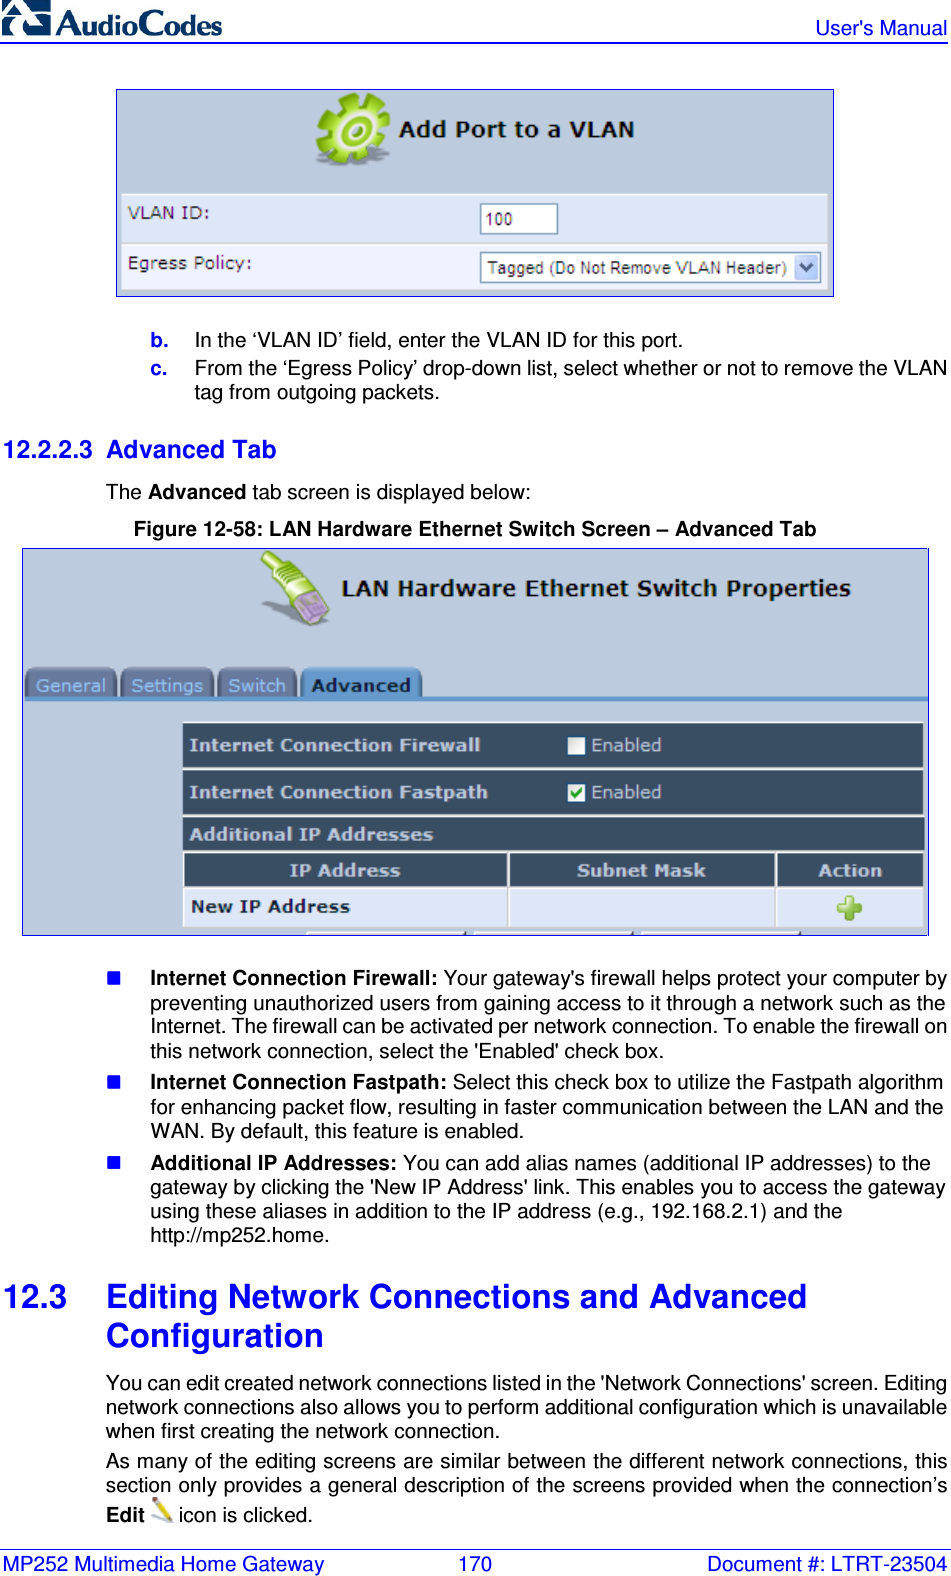 MP252 Multimedia Home Gateway  170  Document #: LTRT-23504   User&apos;s Manual   b.  In the ‘VLAN ID’ field, enter the VLAN ID for this port. c.  From the ‘Egress Policy’ drop-down list, select whether or not to remove the VLAN tag from outgoing packets. 12.2.2.3  Advanced Tab The Advanced tab screen is displayed below: Figure 12-58: LAN Hardware Ethernet Switch Screen – Advanced Tab   Internet Connection Firewall: Your gateway&apos;s firewall helps protect your computer by preventing unauthorized users from gaining access to it through a network such as the Internet. The firewall can be activated per network connection. To enable the firewall on this network connection, select the &apos;Enabled&apos; check box.   Internet Connection Fastpath: Select this check box to utilize the Fastpath algorithm for enhancing packet flow, resulting in faster communication between the LAN and the WAN. By default, this feature is enabled.  Additional IP Addresses: You can add alias names (additional IP addresses) to the gateway by clicking the &apos;New IP Address&apos; link. This enables you to access the gateway using these aliases in addition to the IP address (e.g., 192.168.2.1) and the http://mp252.home. 12.3  Editing Network Connections and Advanced Configuration You can edit created network connections listed in the &apos;Network Connections&apos; screen. Editing network connections also allows you to perform additional configuration which is unavailable when first creating the network connection.  As many of the editing screens are similar between the different network connections, this section only provides a general description of the screens provided when the connection’s Edit  icon is clicked. 